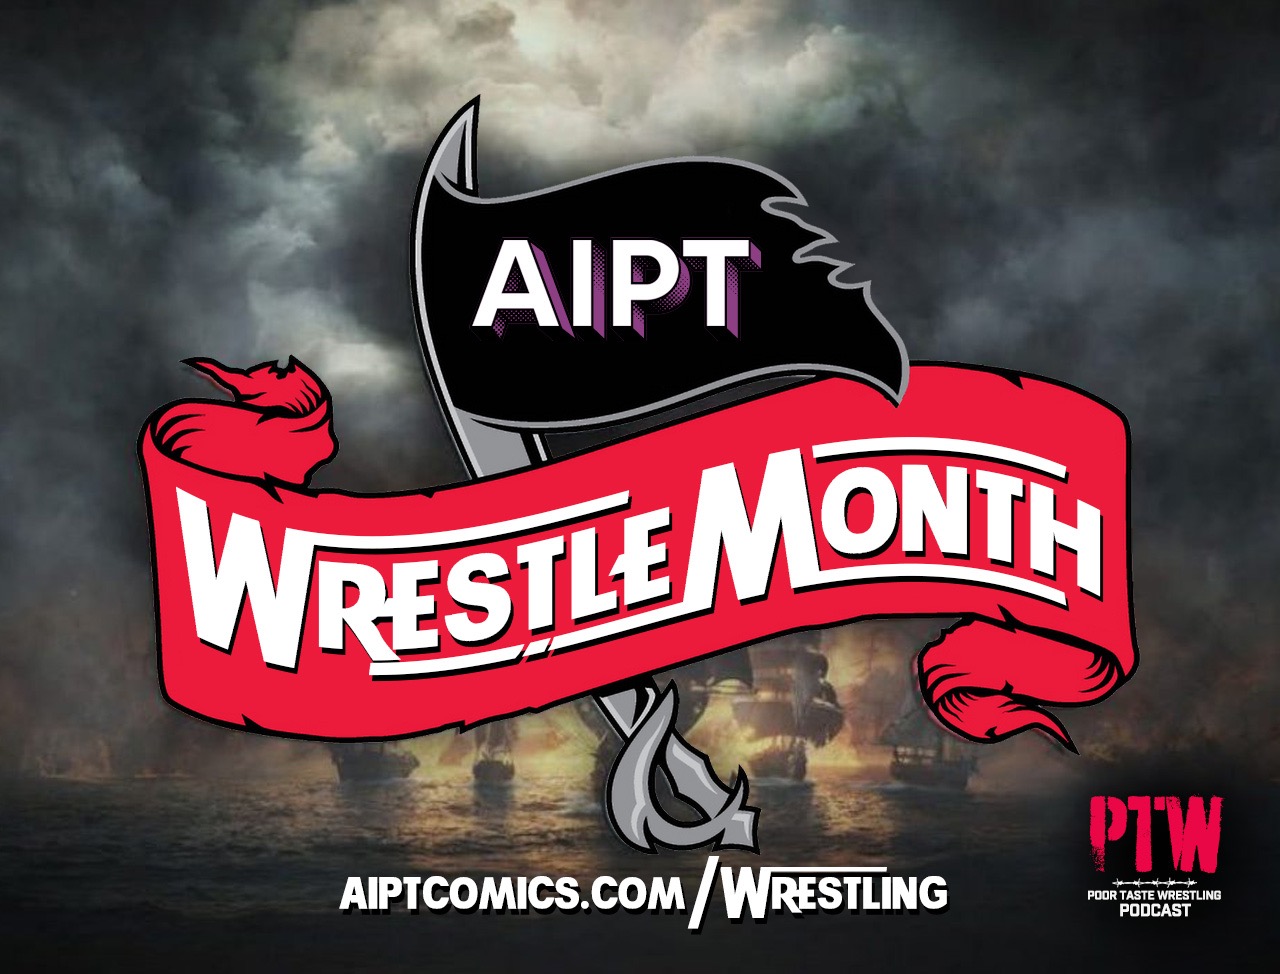 Welcome to AIPT WrestleMonth